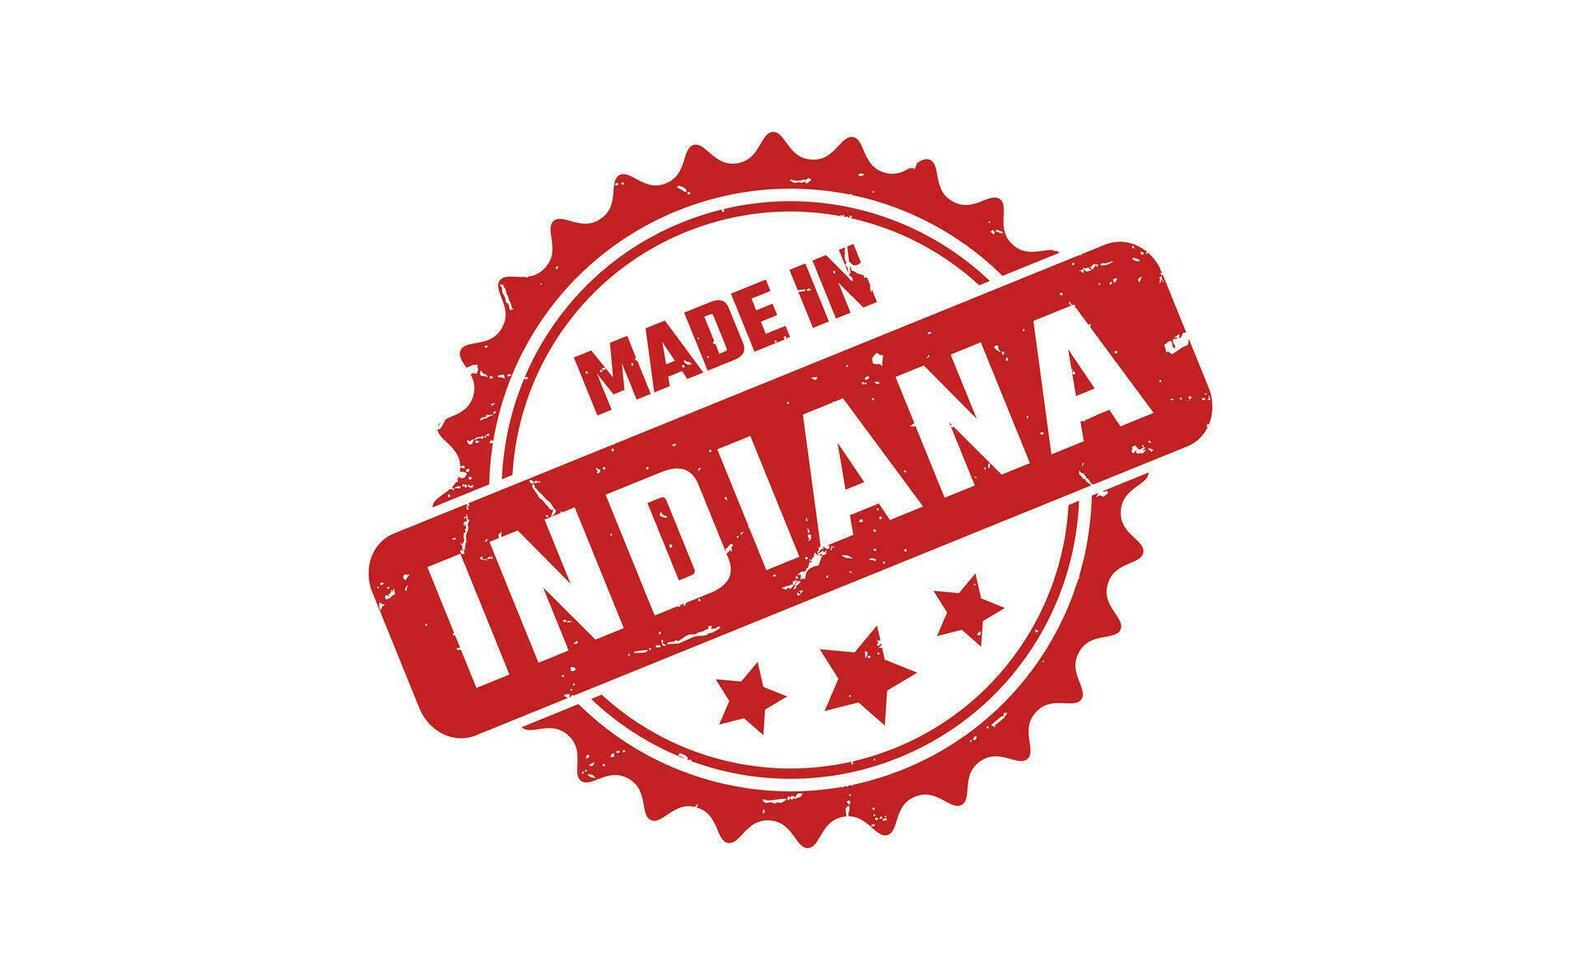 Made In Indiana Rubber Stamp vector